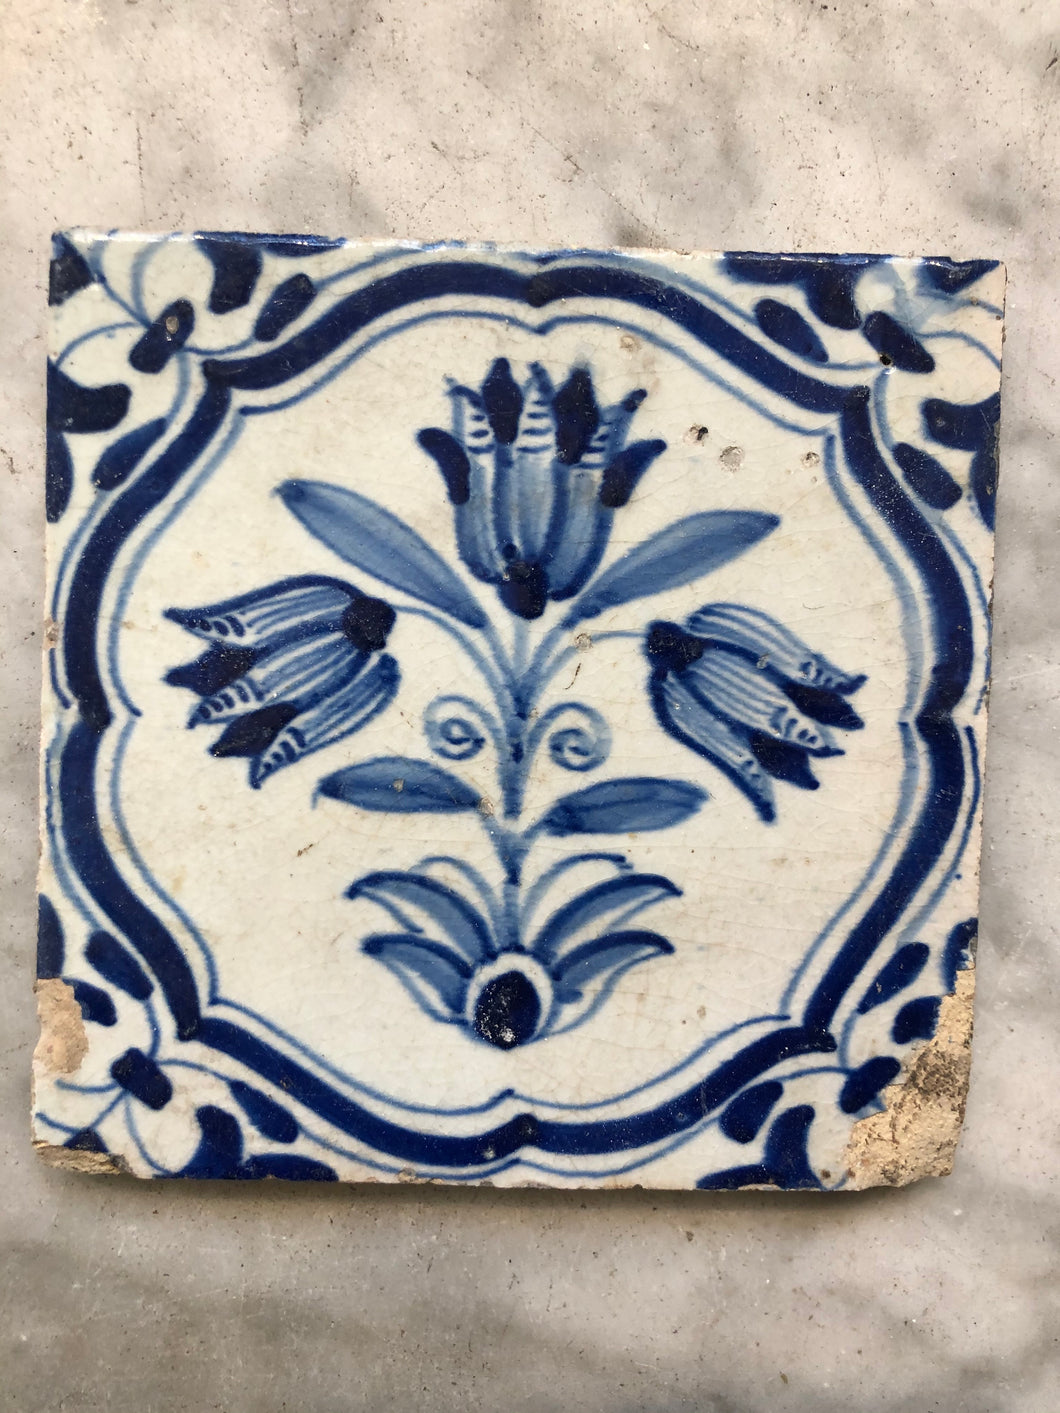 17 th century delft tile with flower/ tulips